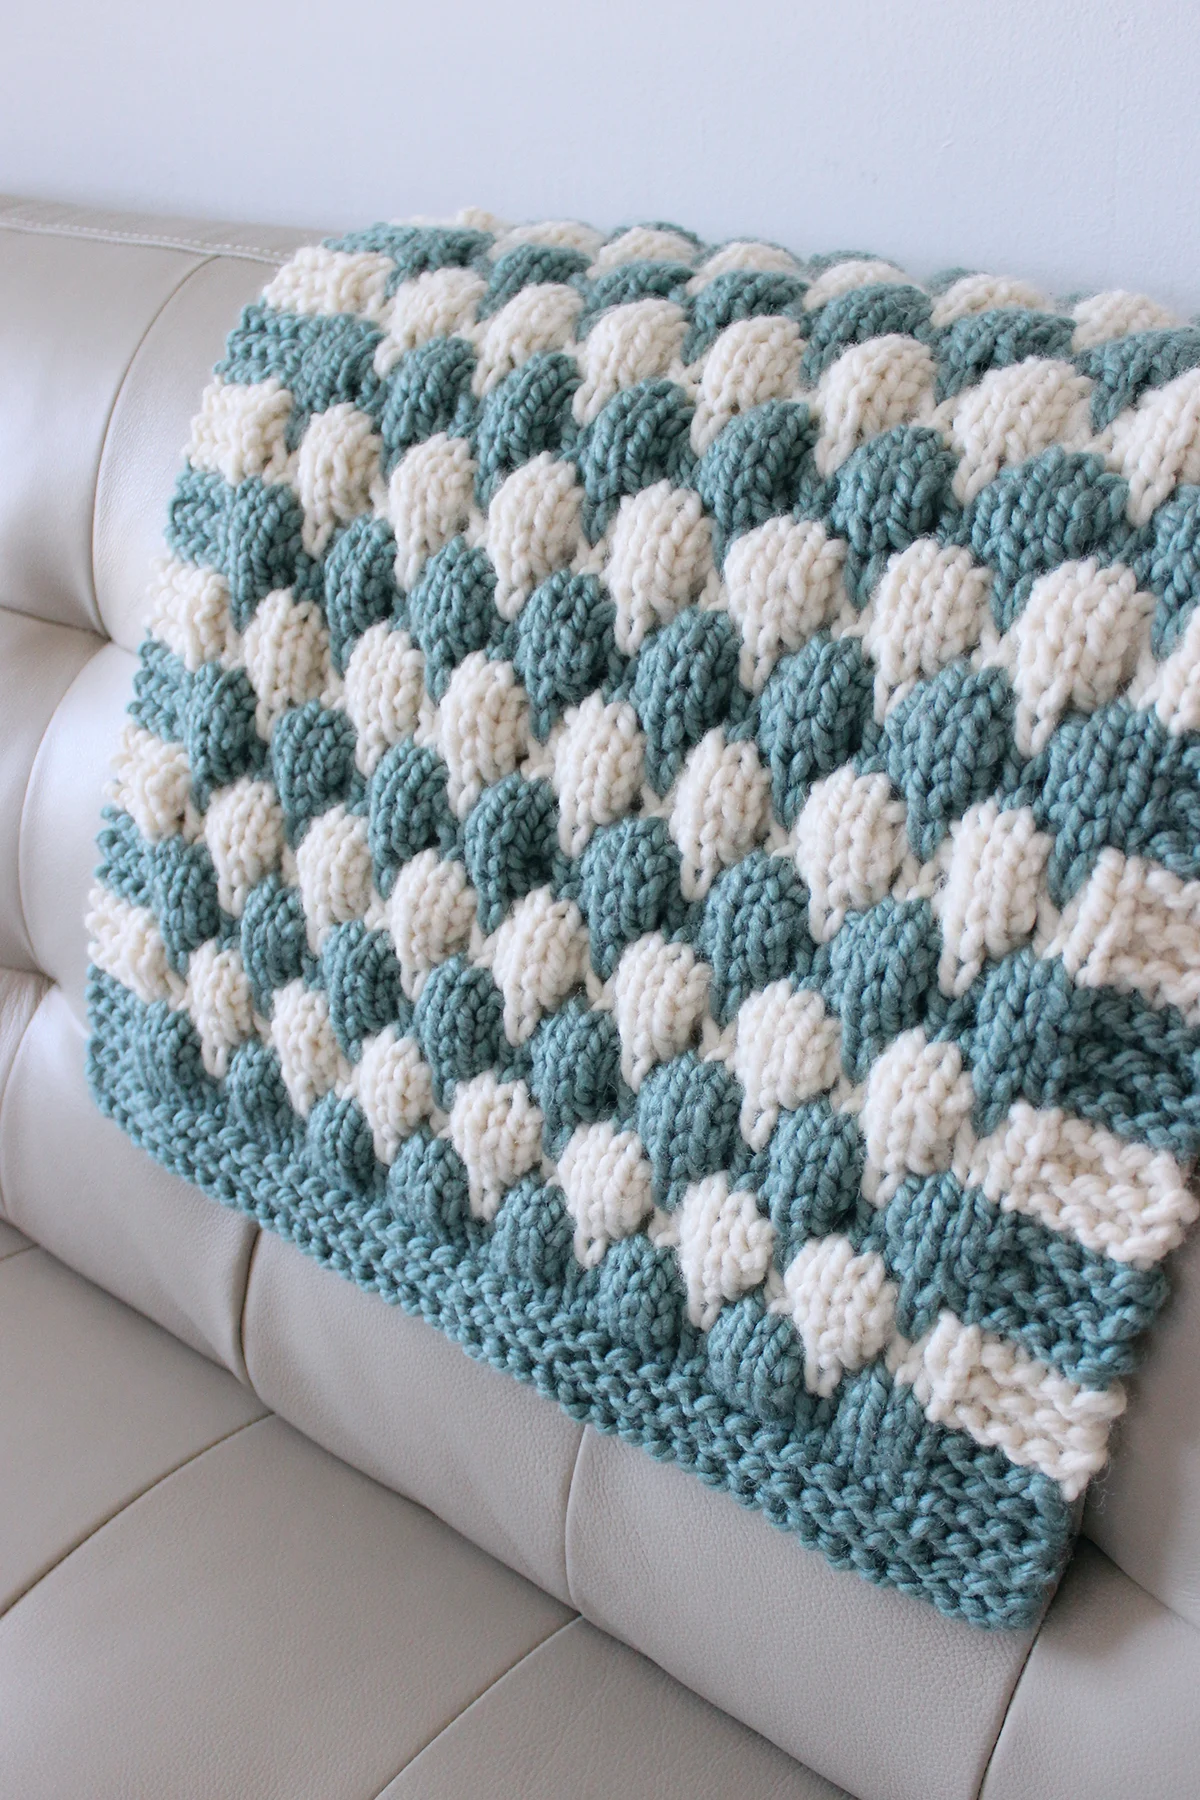 Chunky baby blanket in blue and white yarn colors on couch.